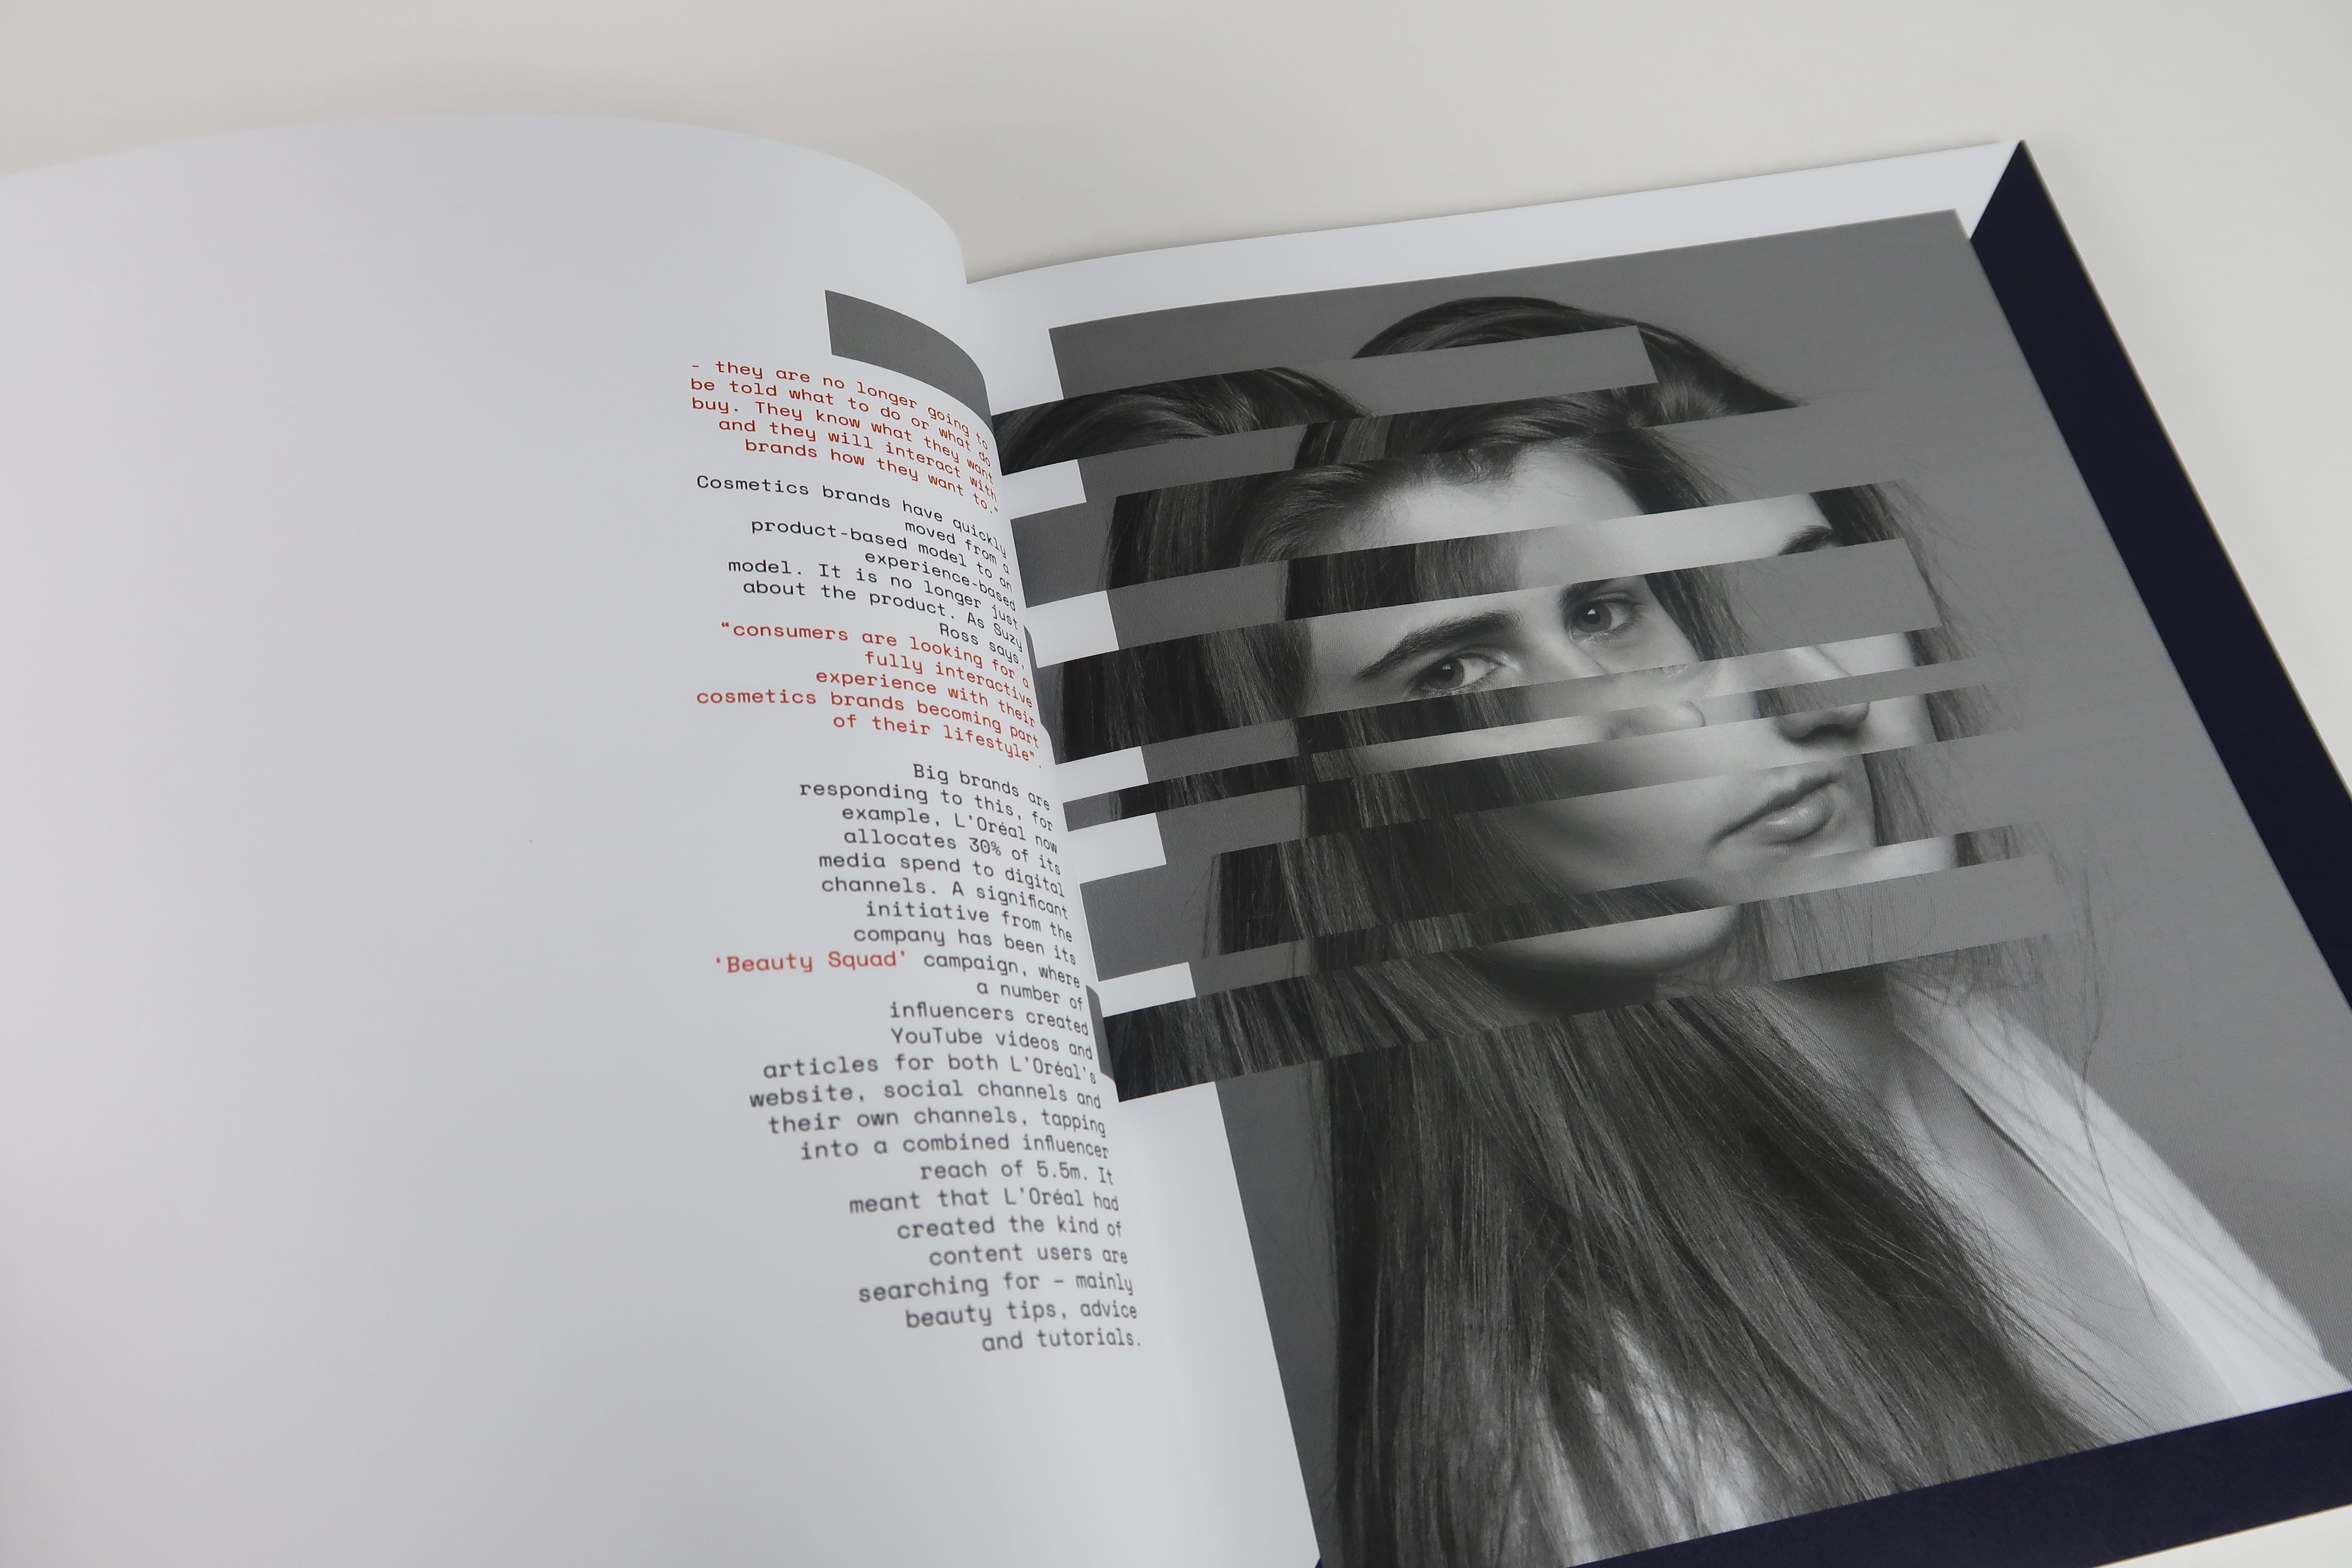 A double page magazine spread, a black and white portrait image with a glitch effect runs across the spread, accompanied by a body of text.